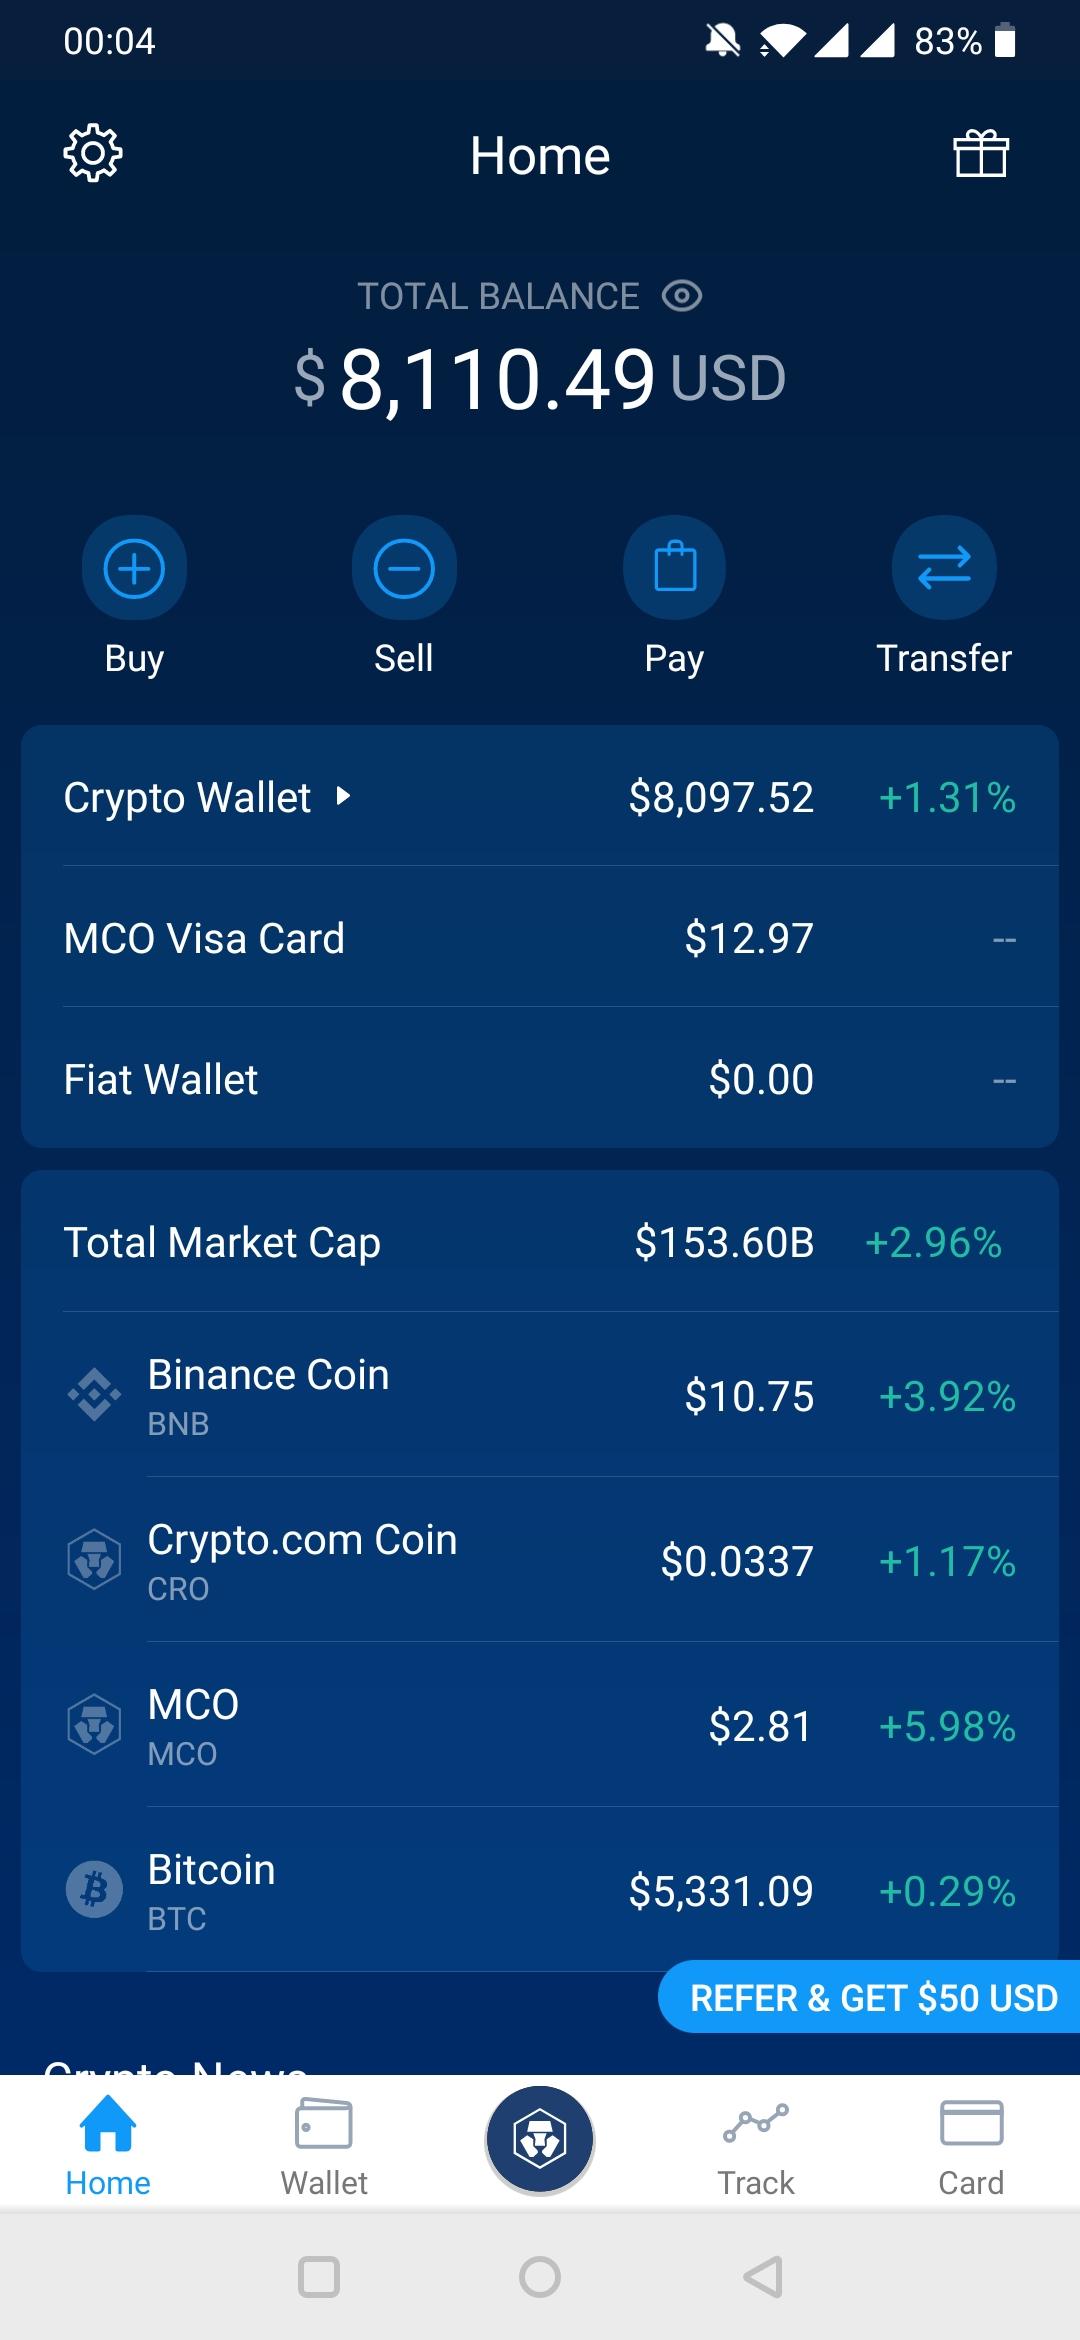 how to set up an account on crypto.com